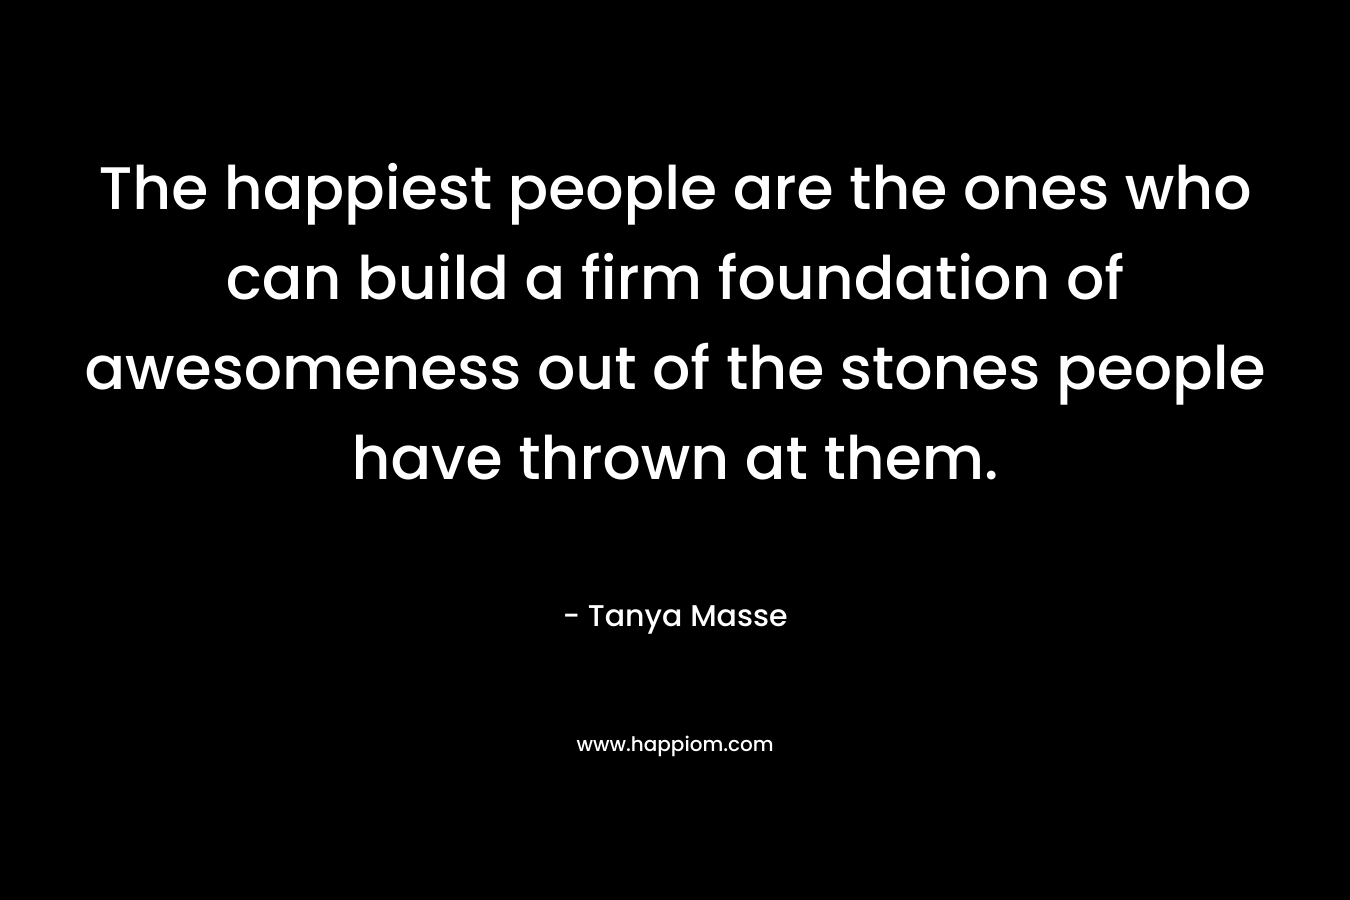 The happiest people are the ones who can build a firm foundation of awesomeness out of the stones people have thrown at them.